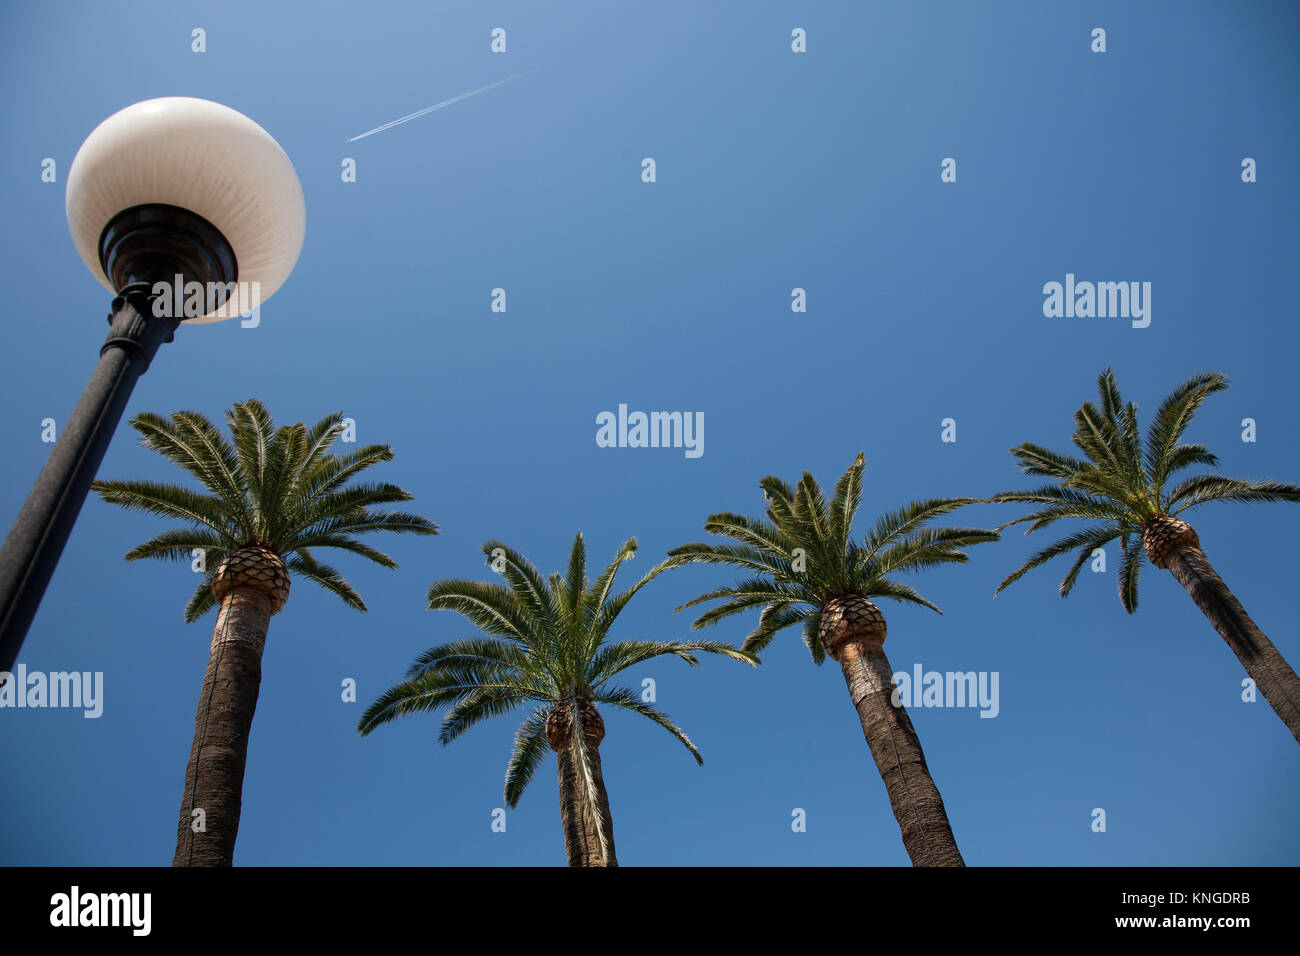 Four palm trees and a lamppost against a blue sky with aircraft vapour trail in the distance, Sorrento, Italy. Stock Photo